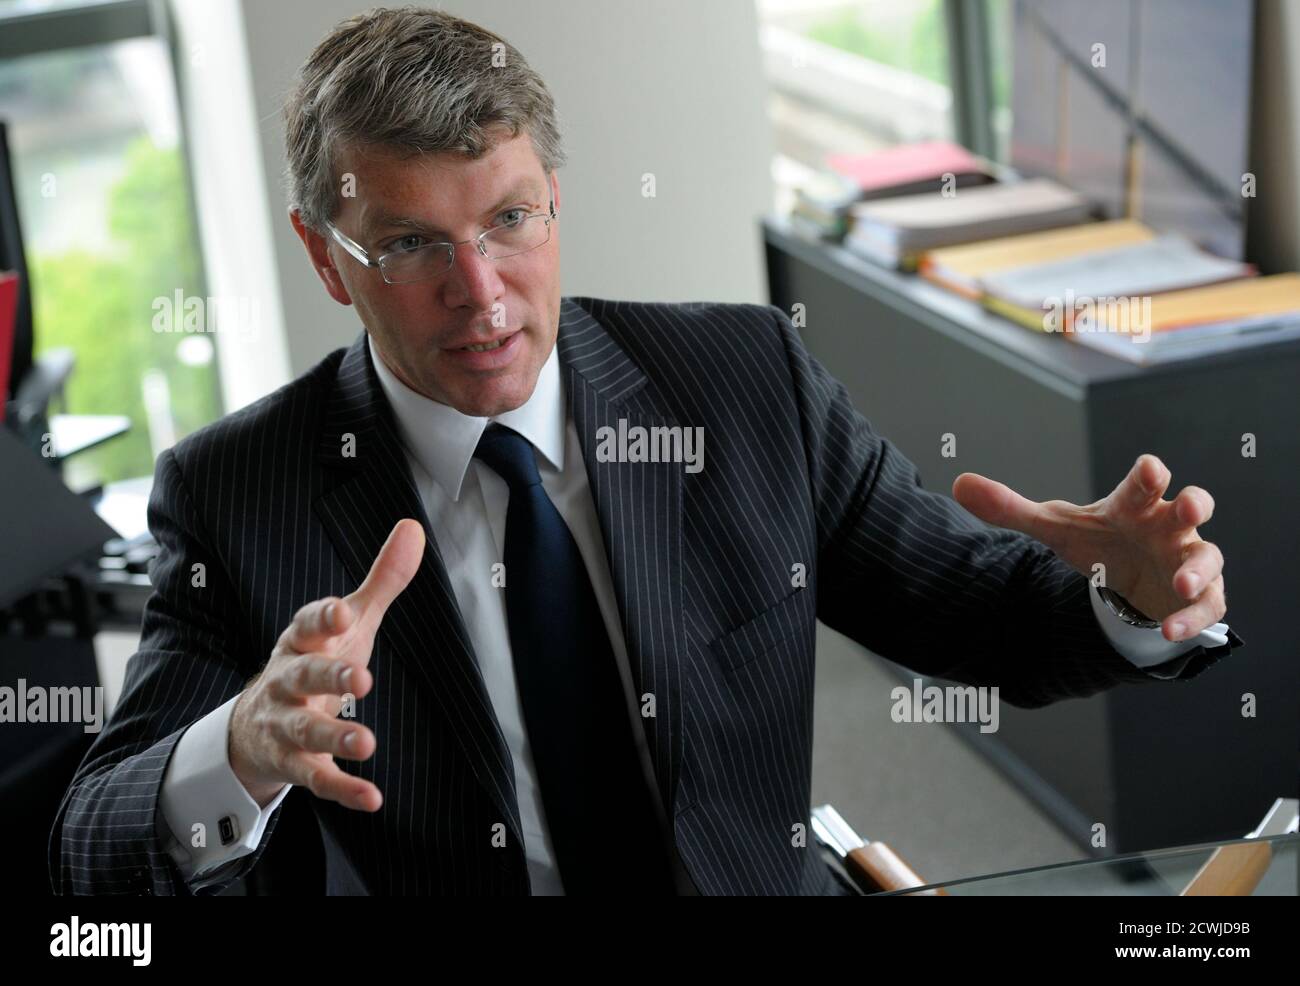 Pierre Berger, Chief Executive Officer of the French construction group Eiffage, speaks to Reuters during an interview at the company's headquarters in Asnieres, near Paris, June 5, 2012.   REUTERS/Philippe Wojazer   (FRANCE - Tags: BUSINESS CONSTRUCTION) Stock Photo